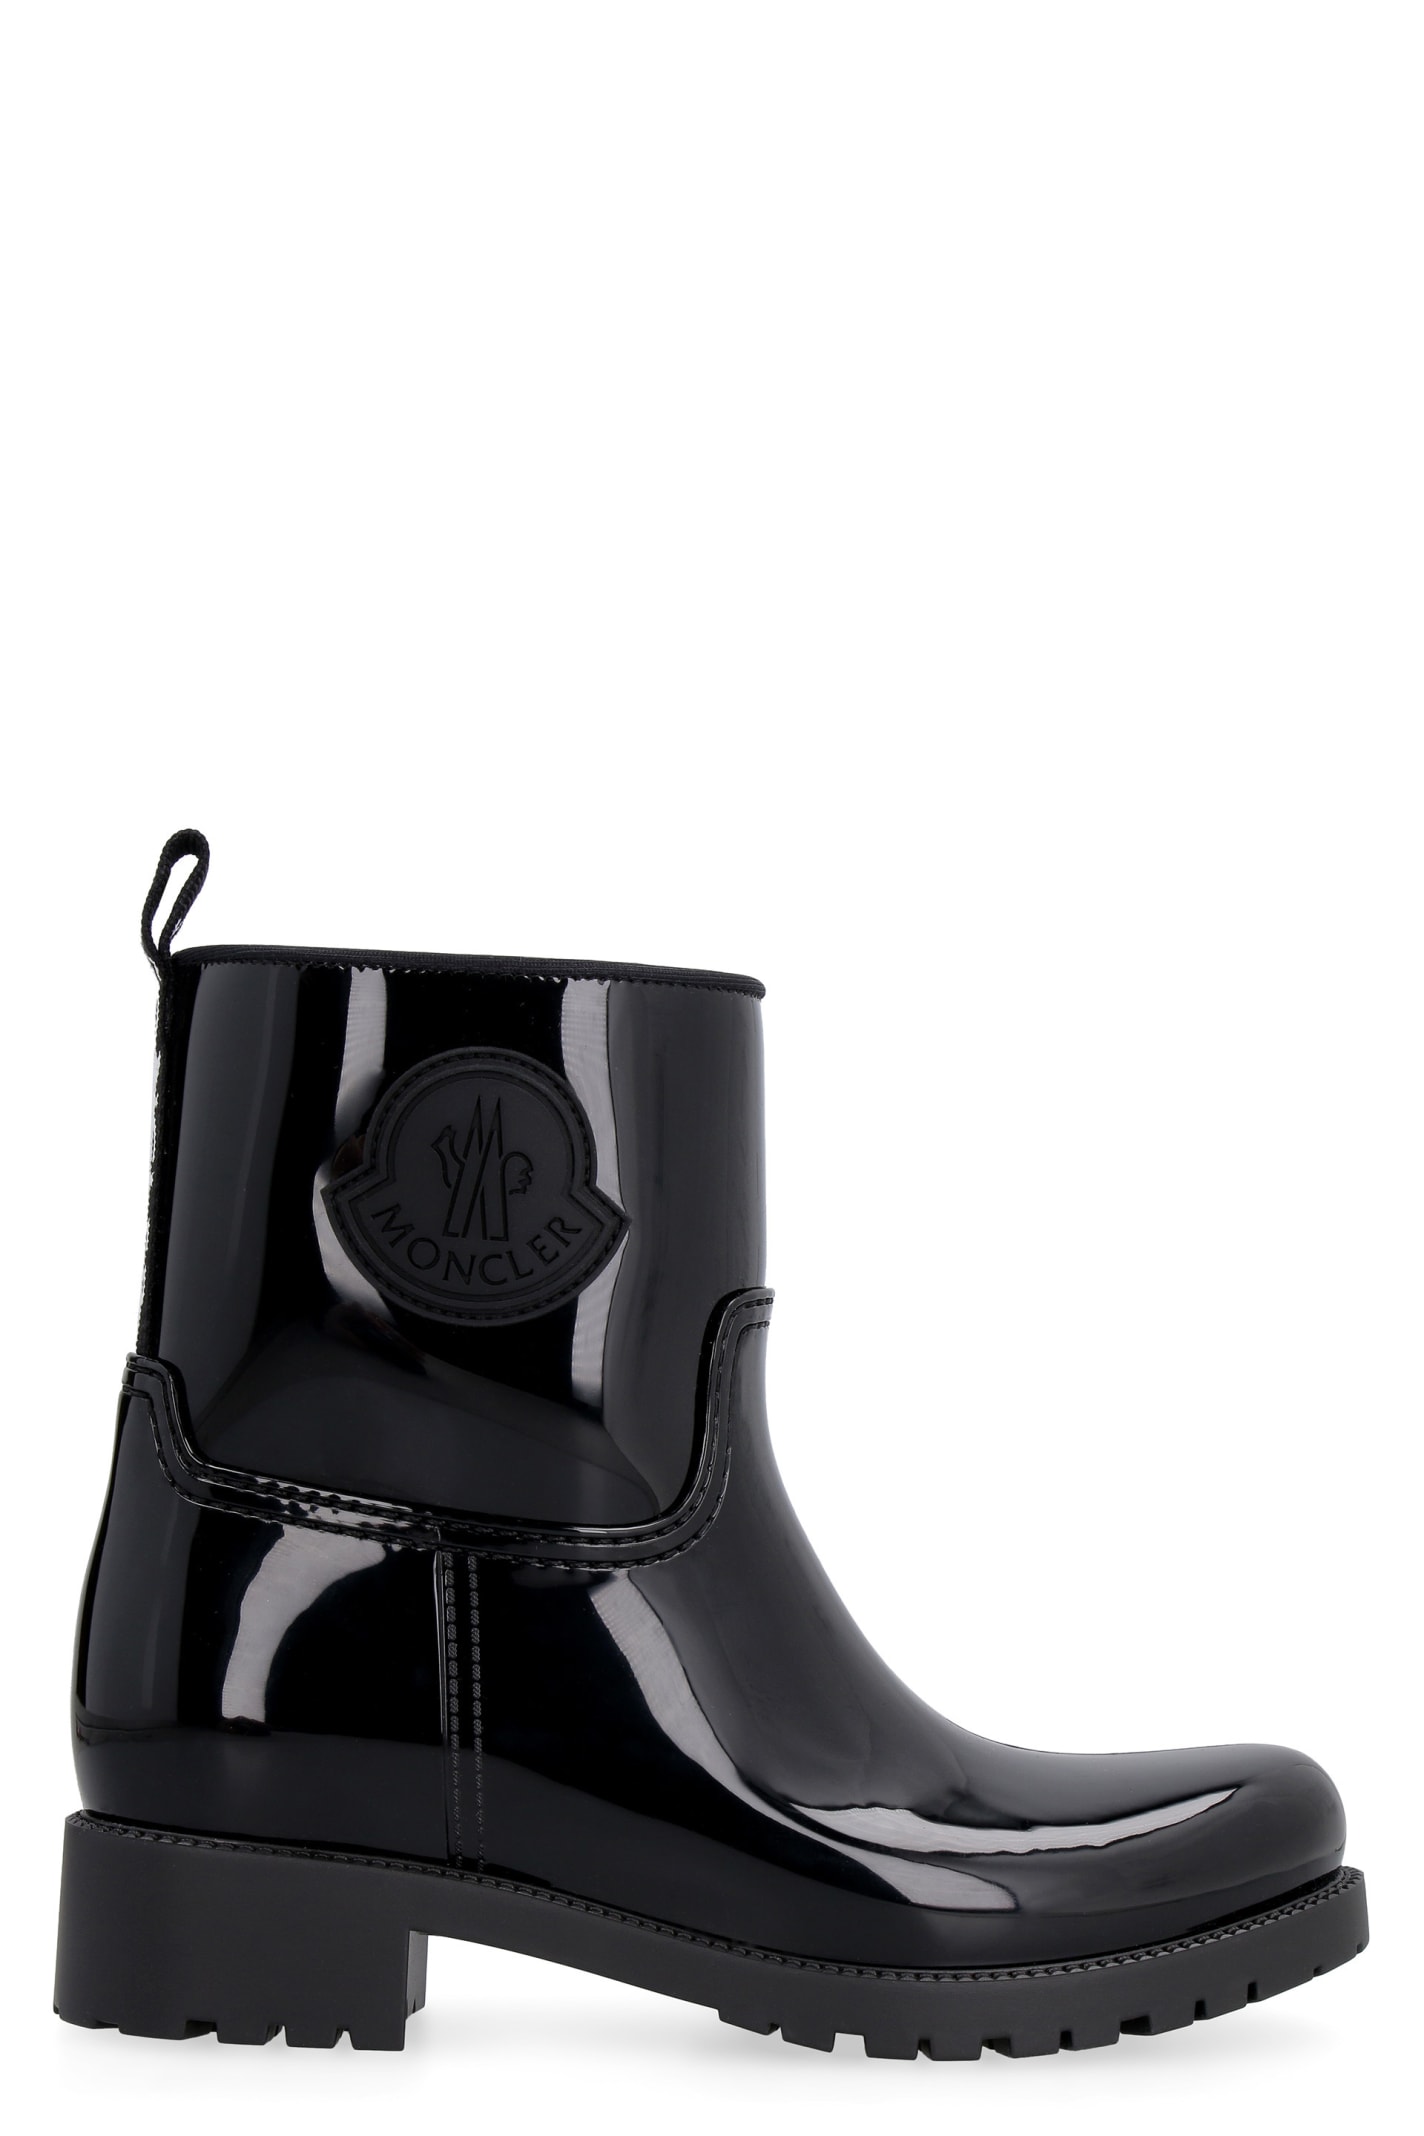 Buy Moncler Ginette Rubber Boots online, shop Moncler shoes with free shipping